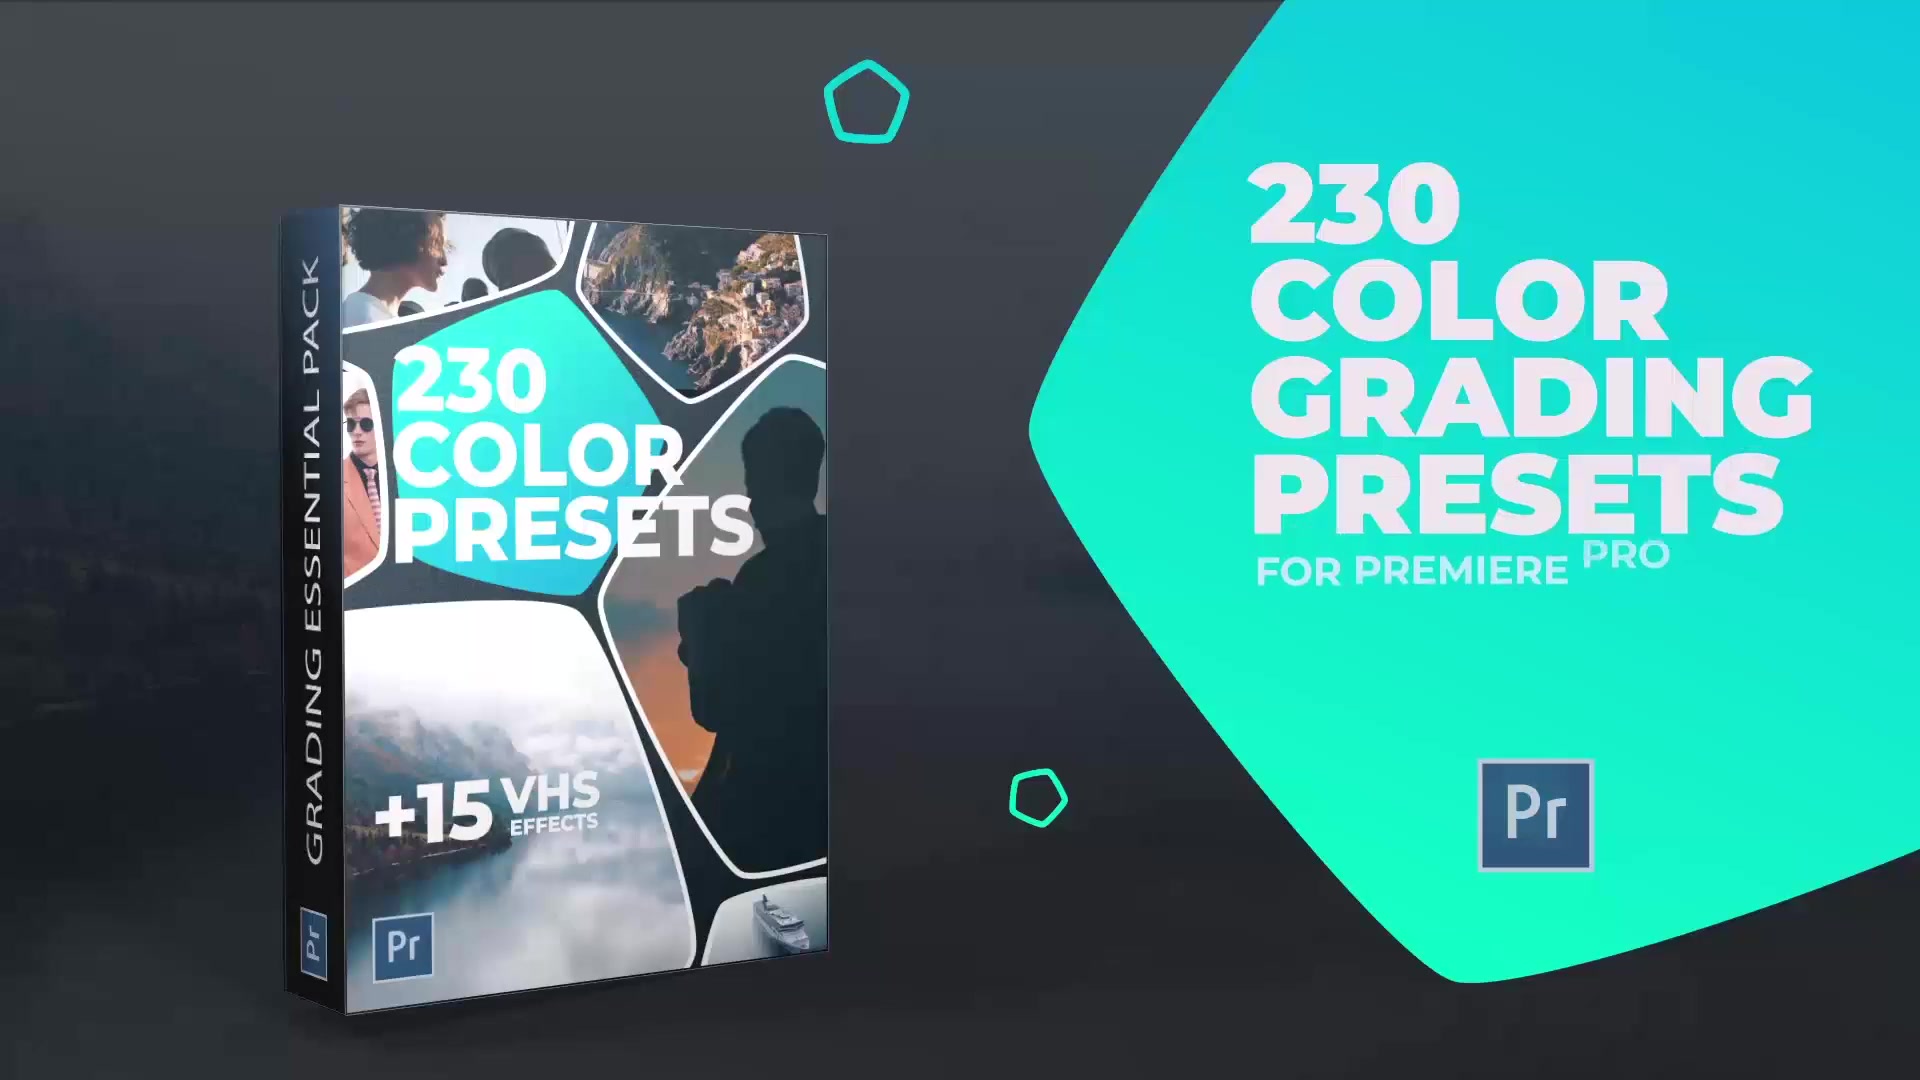 420 Cinematic Color Presets, 15 VHS Video Effects, Old Film Looks Videohive 24589977 Premiere Pro Image 12